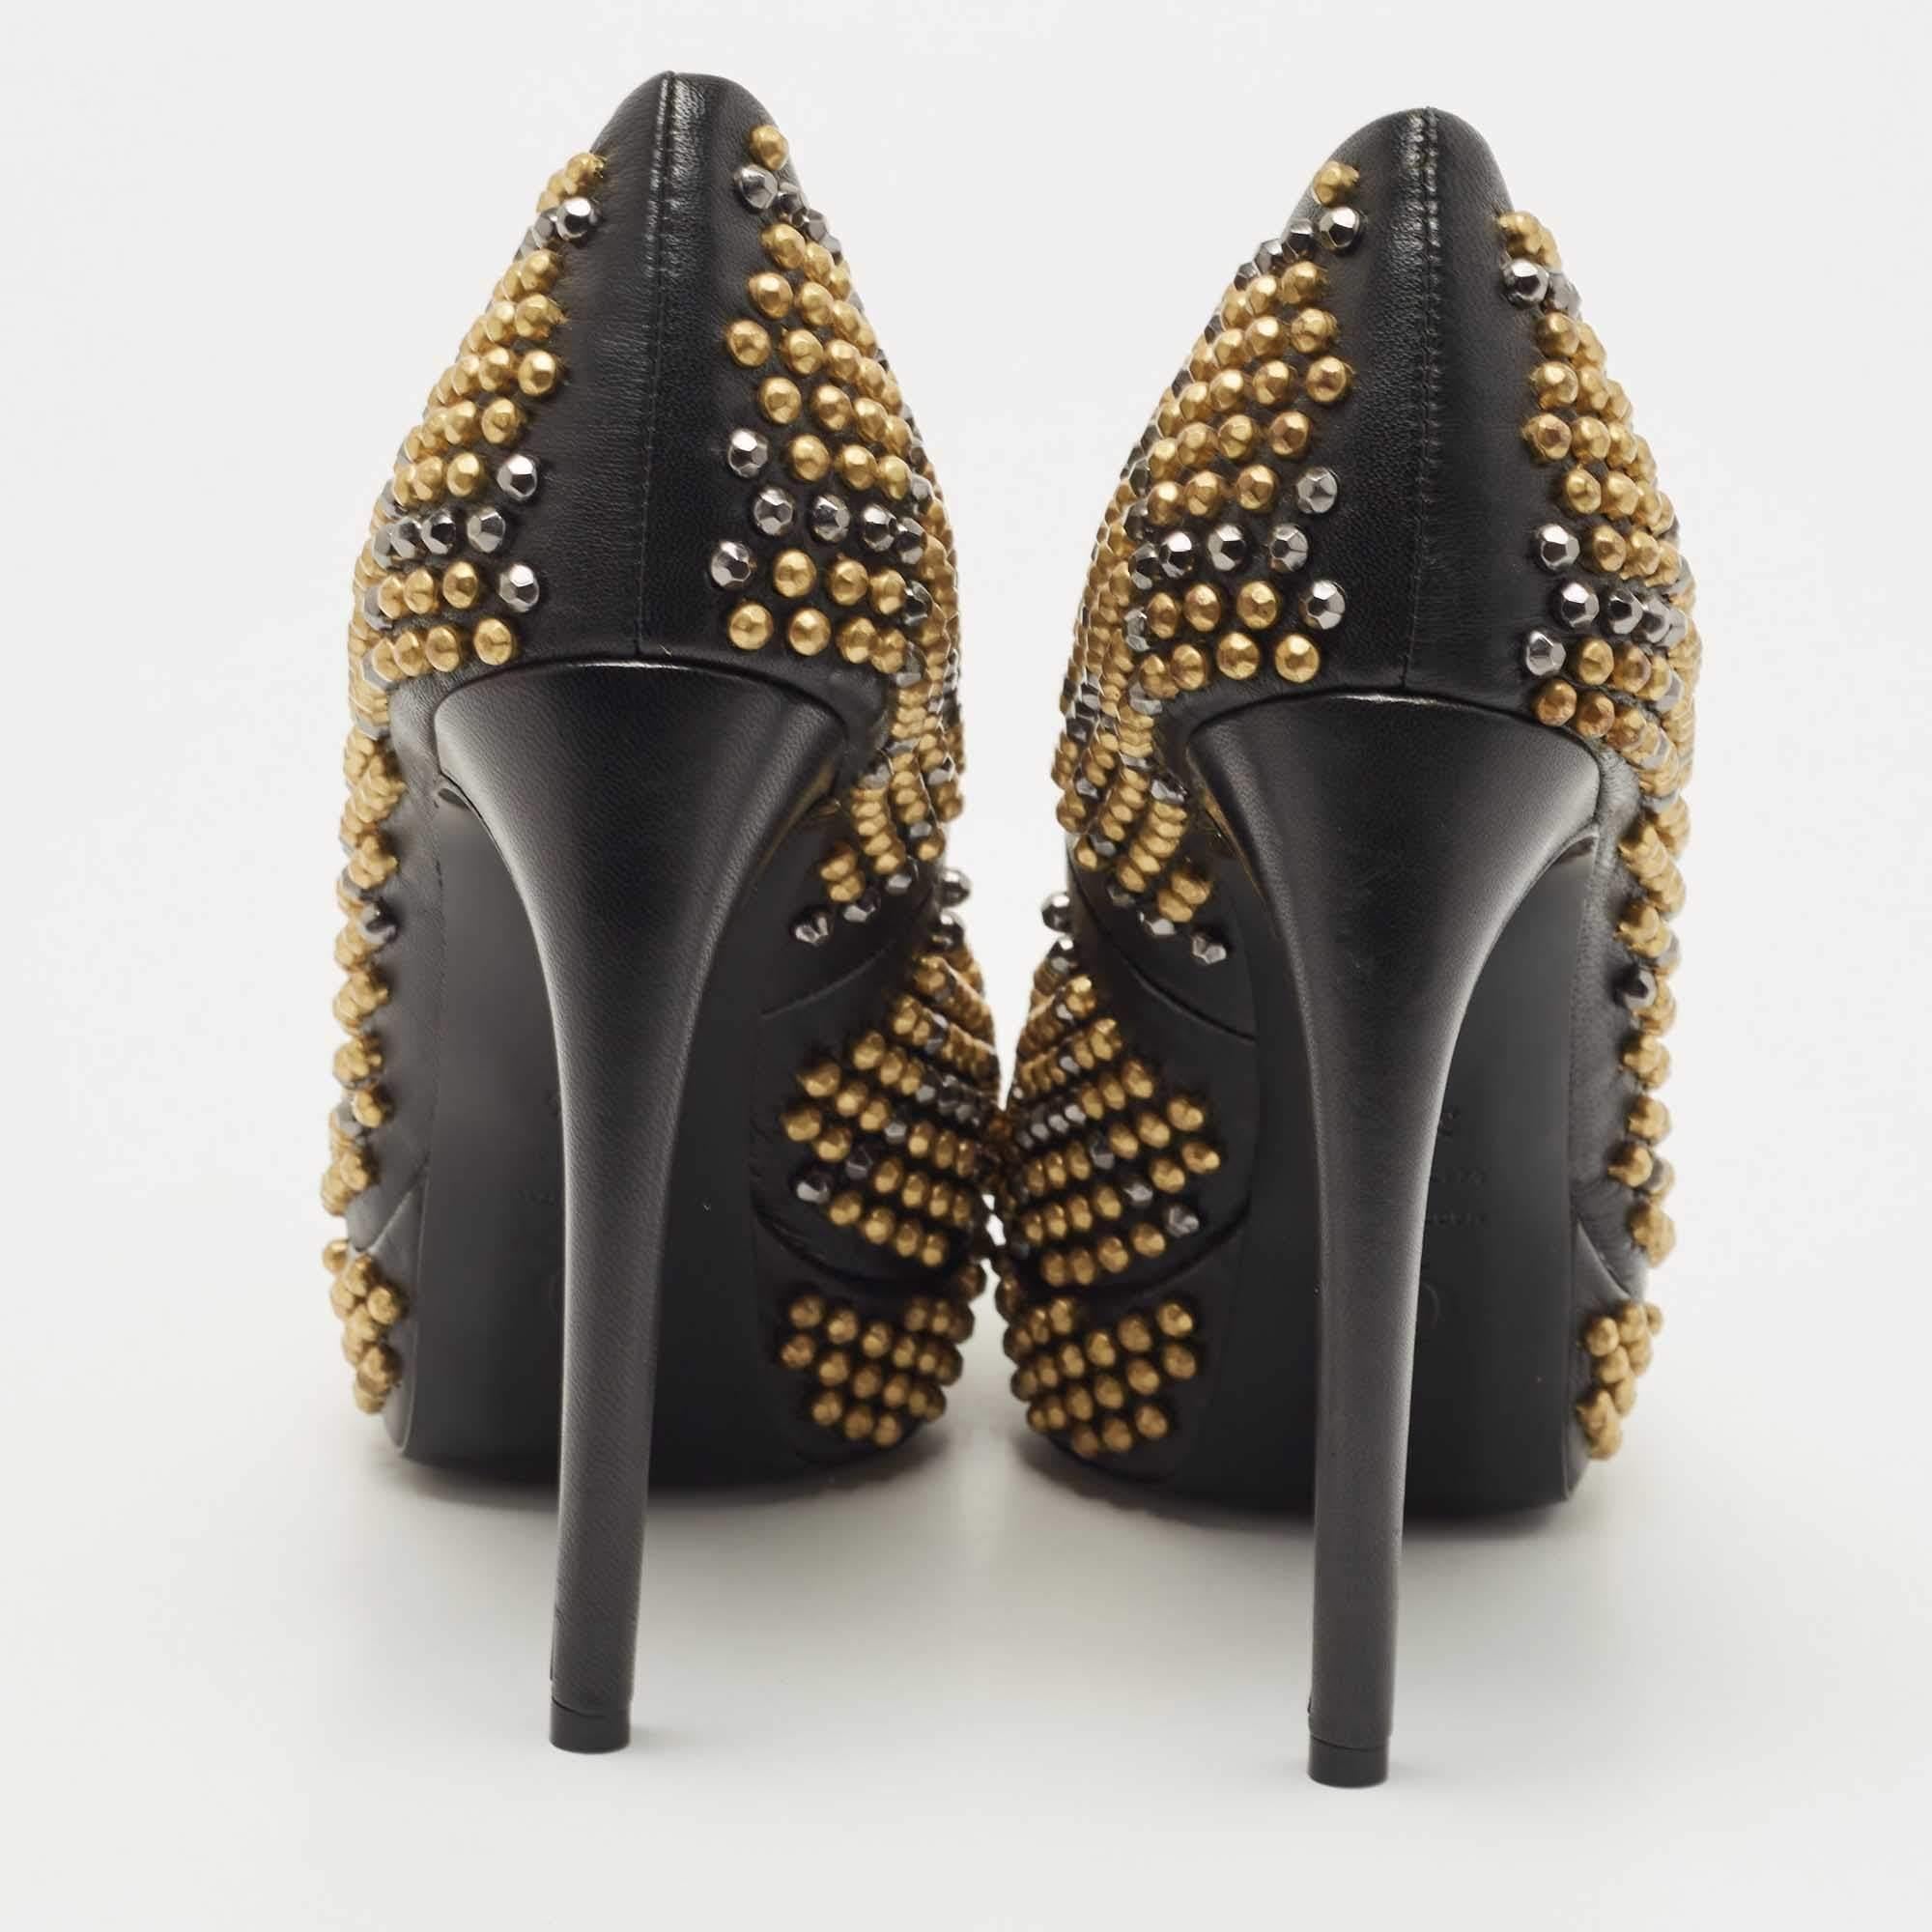 Alexander McQueen Black Leather Studded Pumps Size 37.5 1